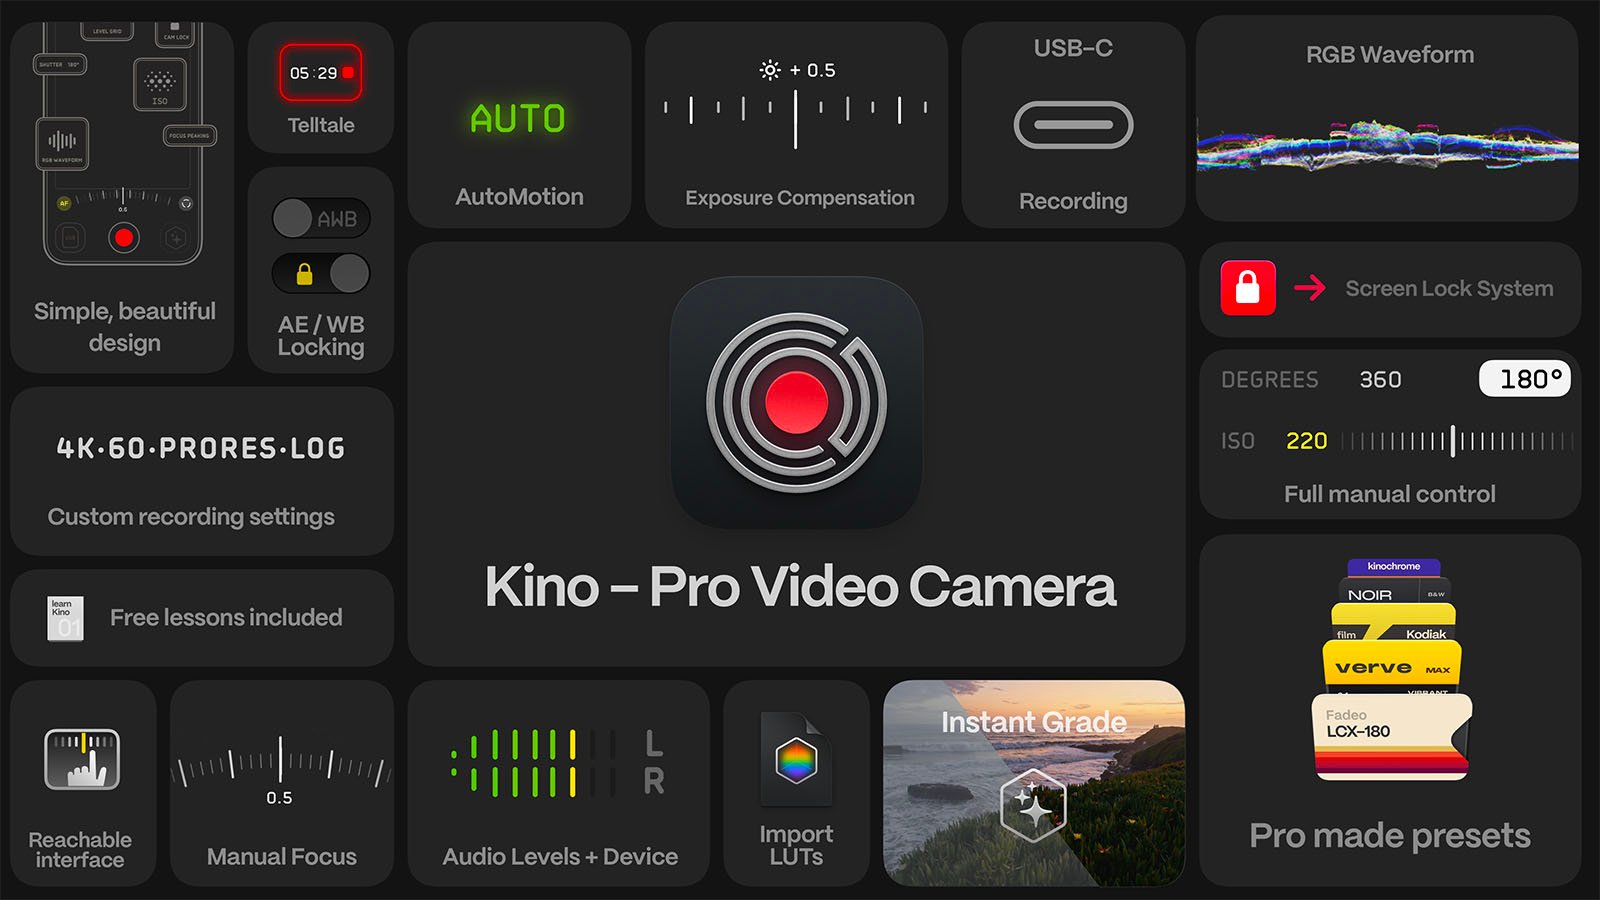 A screenshot of a video camera app interface named "Kino – Pro Video Camera." The interface includes various icons and controls for AutoMotion, exposure compensation, a USB-C port, RGB waveform, recording, screen lock, manual focus, audio levels, and importing LUTs, among other advanced features.